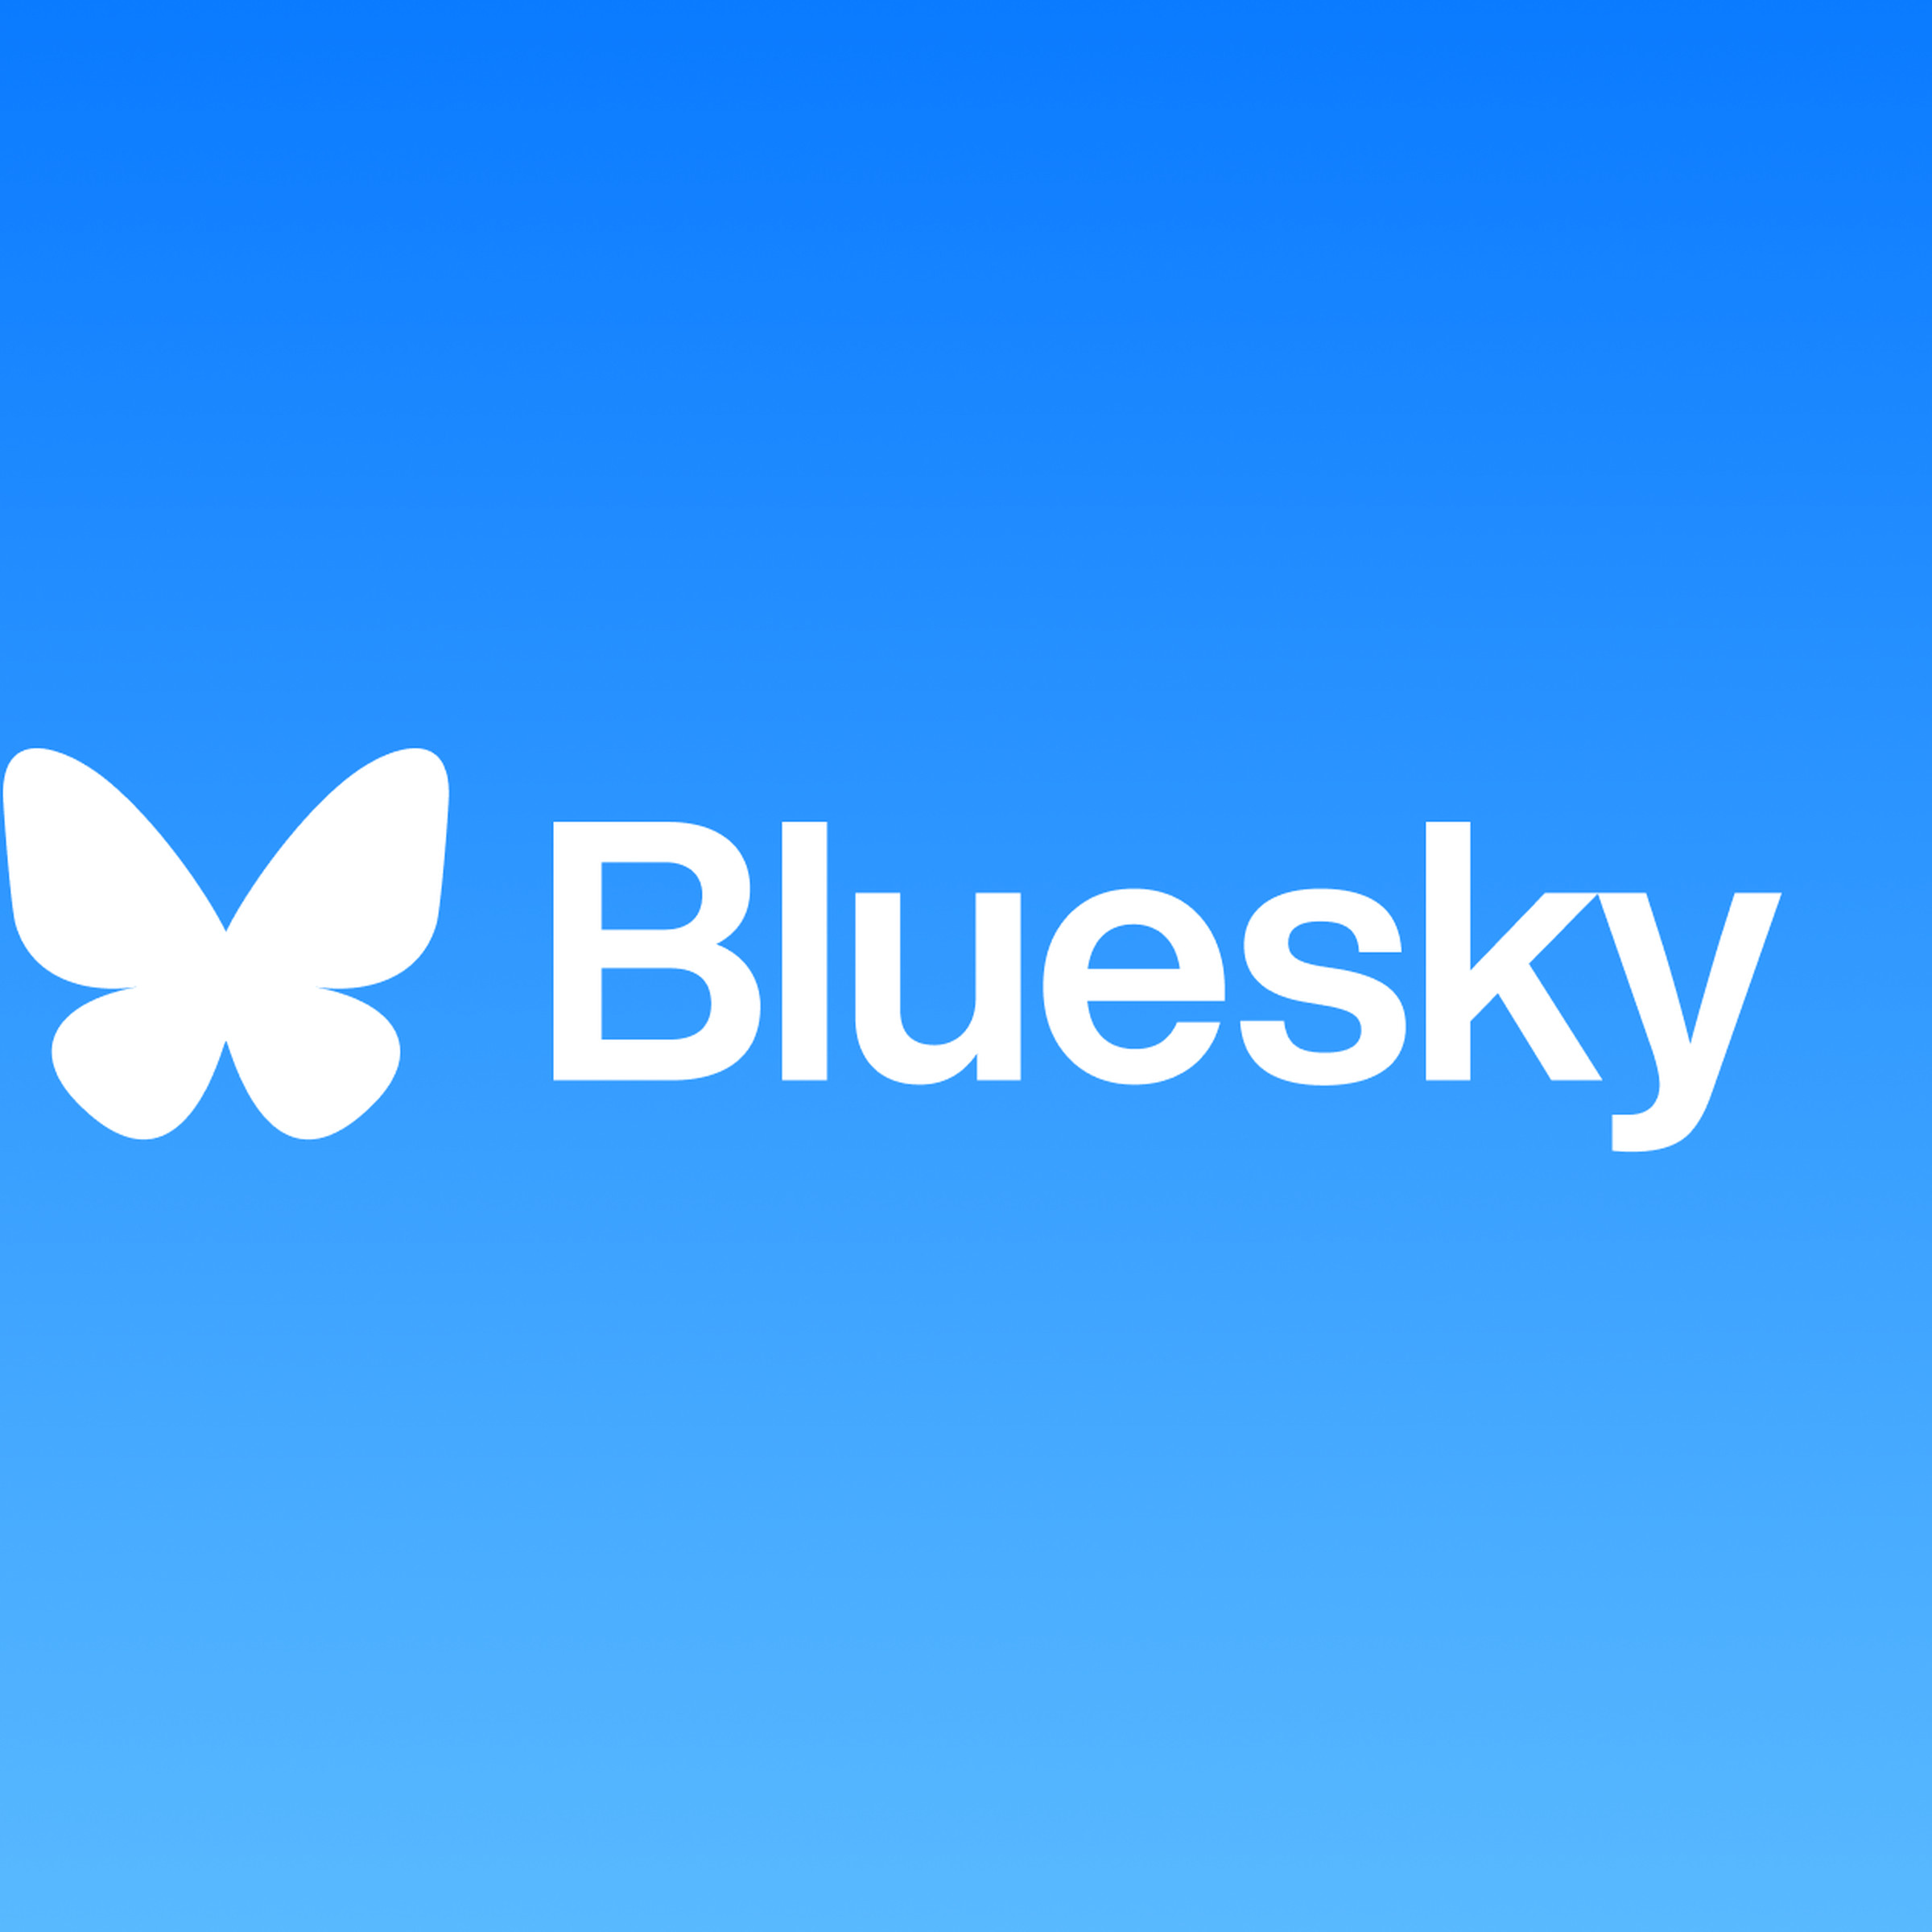 An image showing the Bluesky logo on a gradient blue background